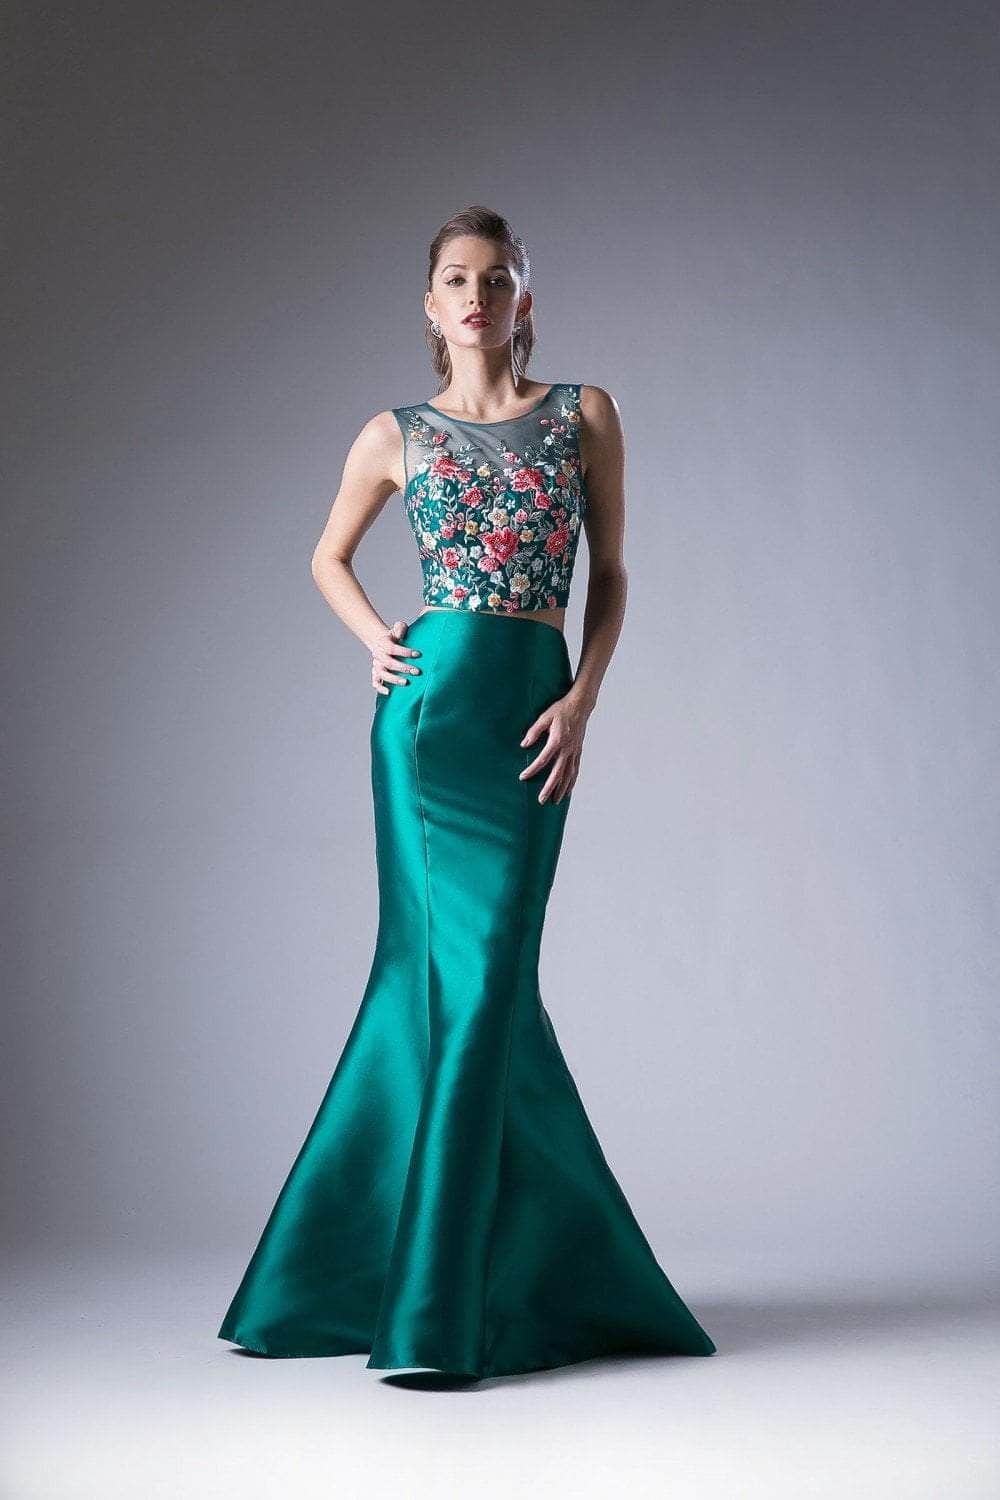 Image of Ladivine HW03 - Floral Appliqued Two Piece Mermaid Gown